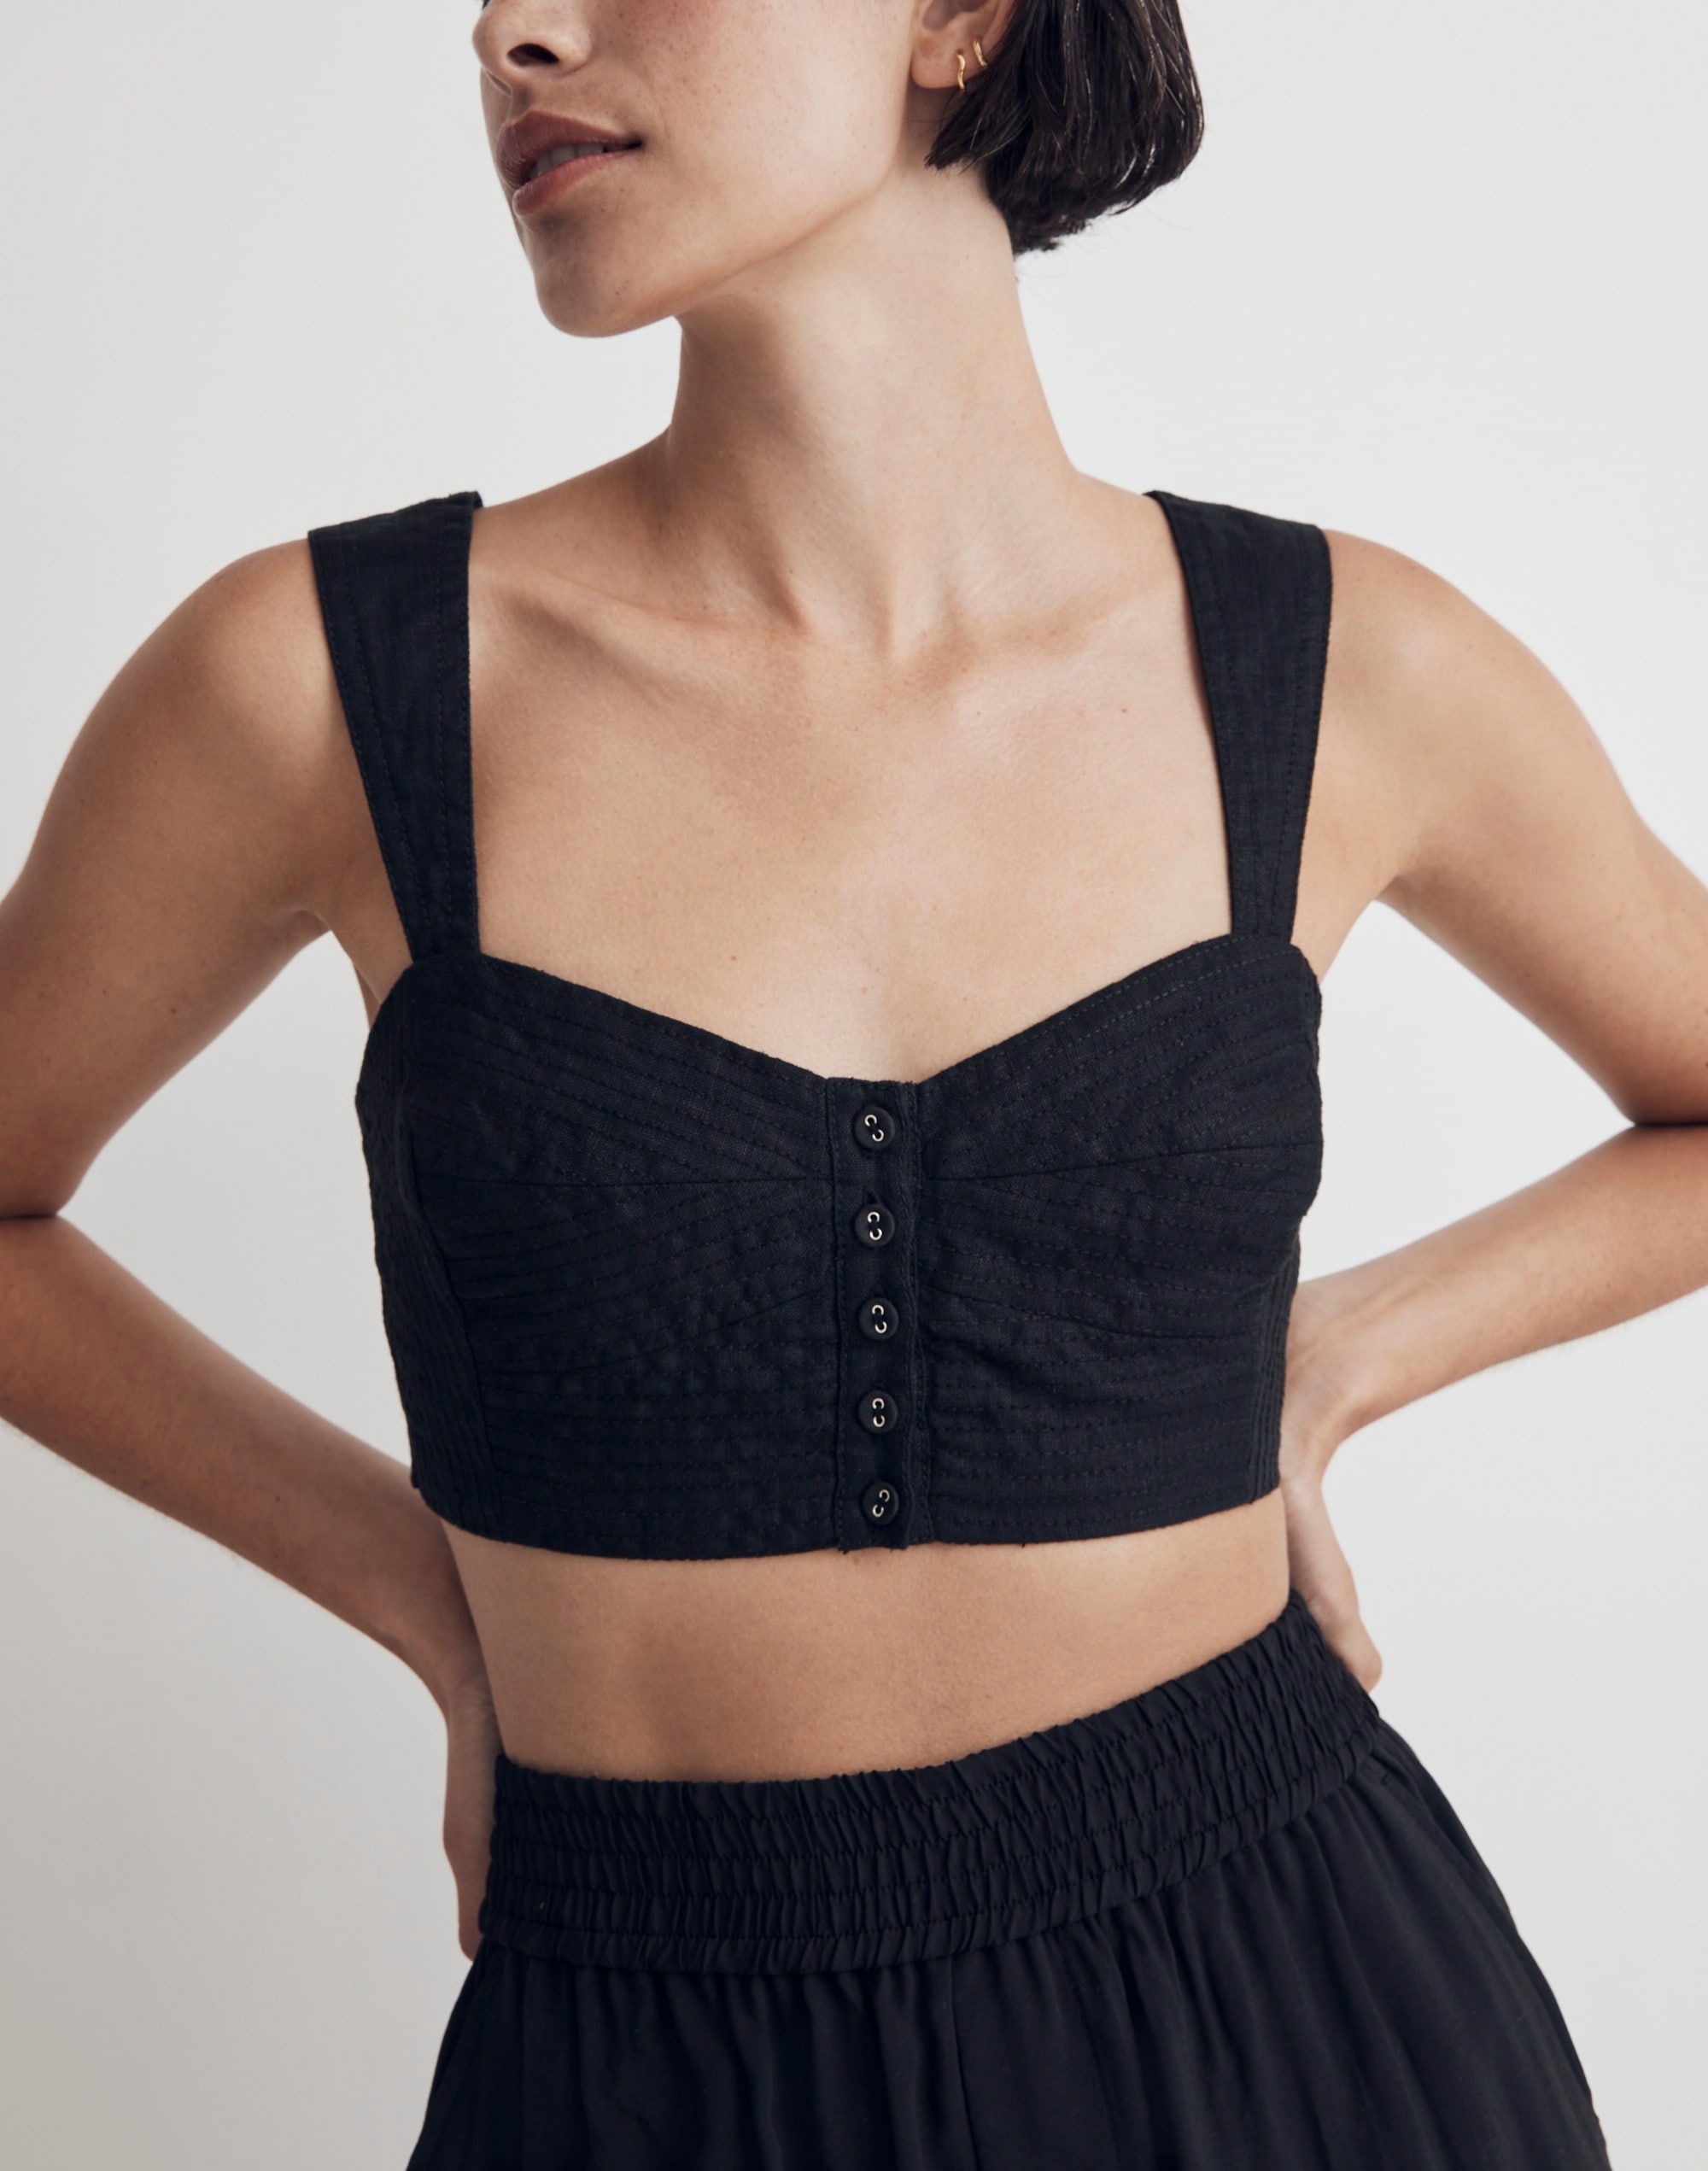 Effortlessly style a black bralette!, Gallery posted by Lilz